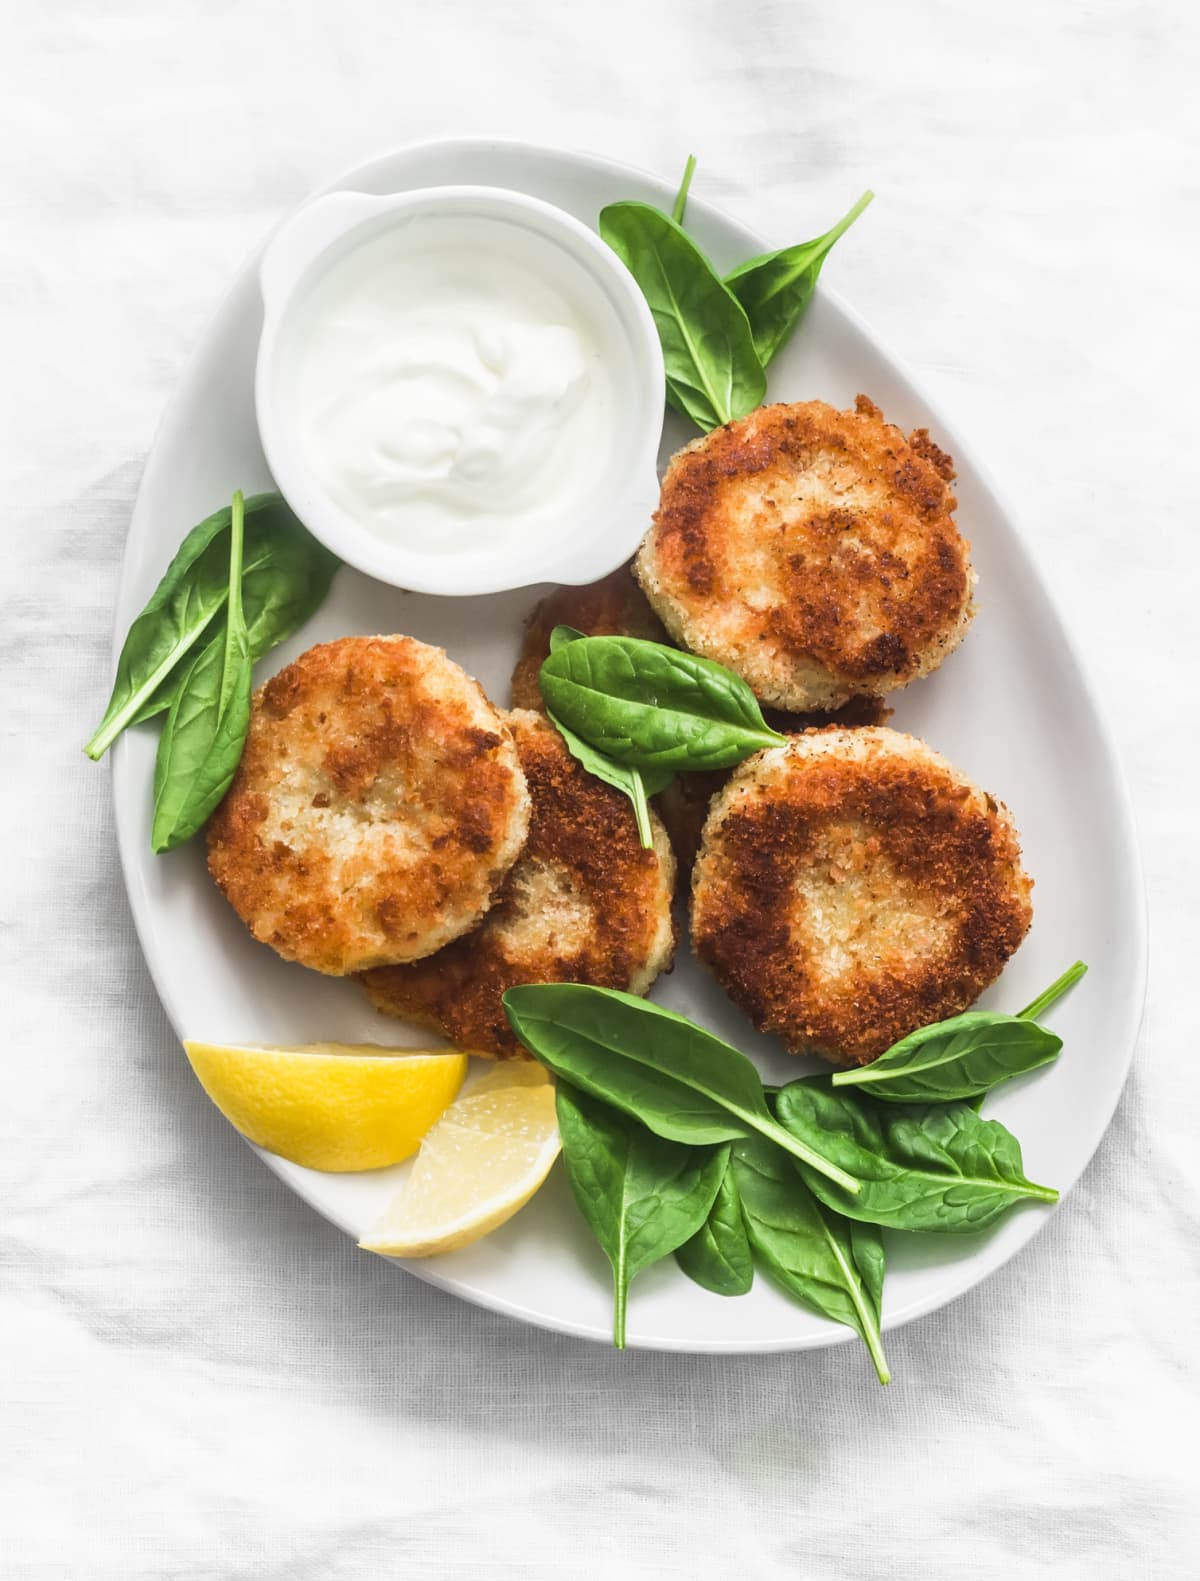 Tuna and potato patties served with spinach and greek yogurt on a light background, top view